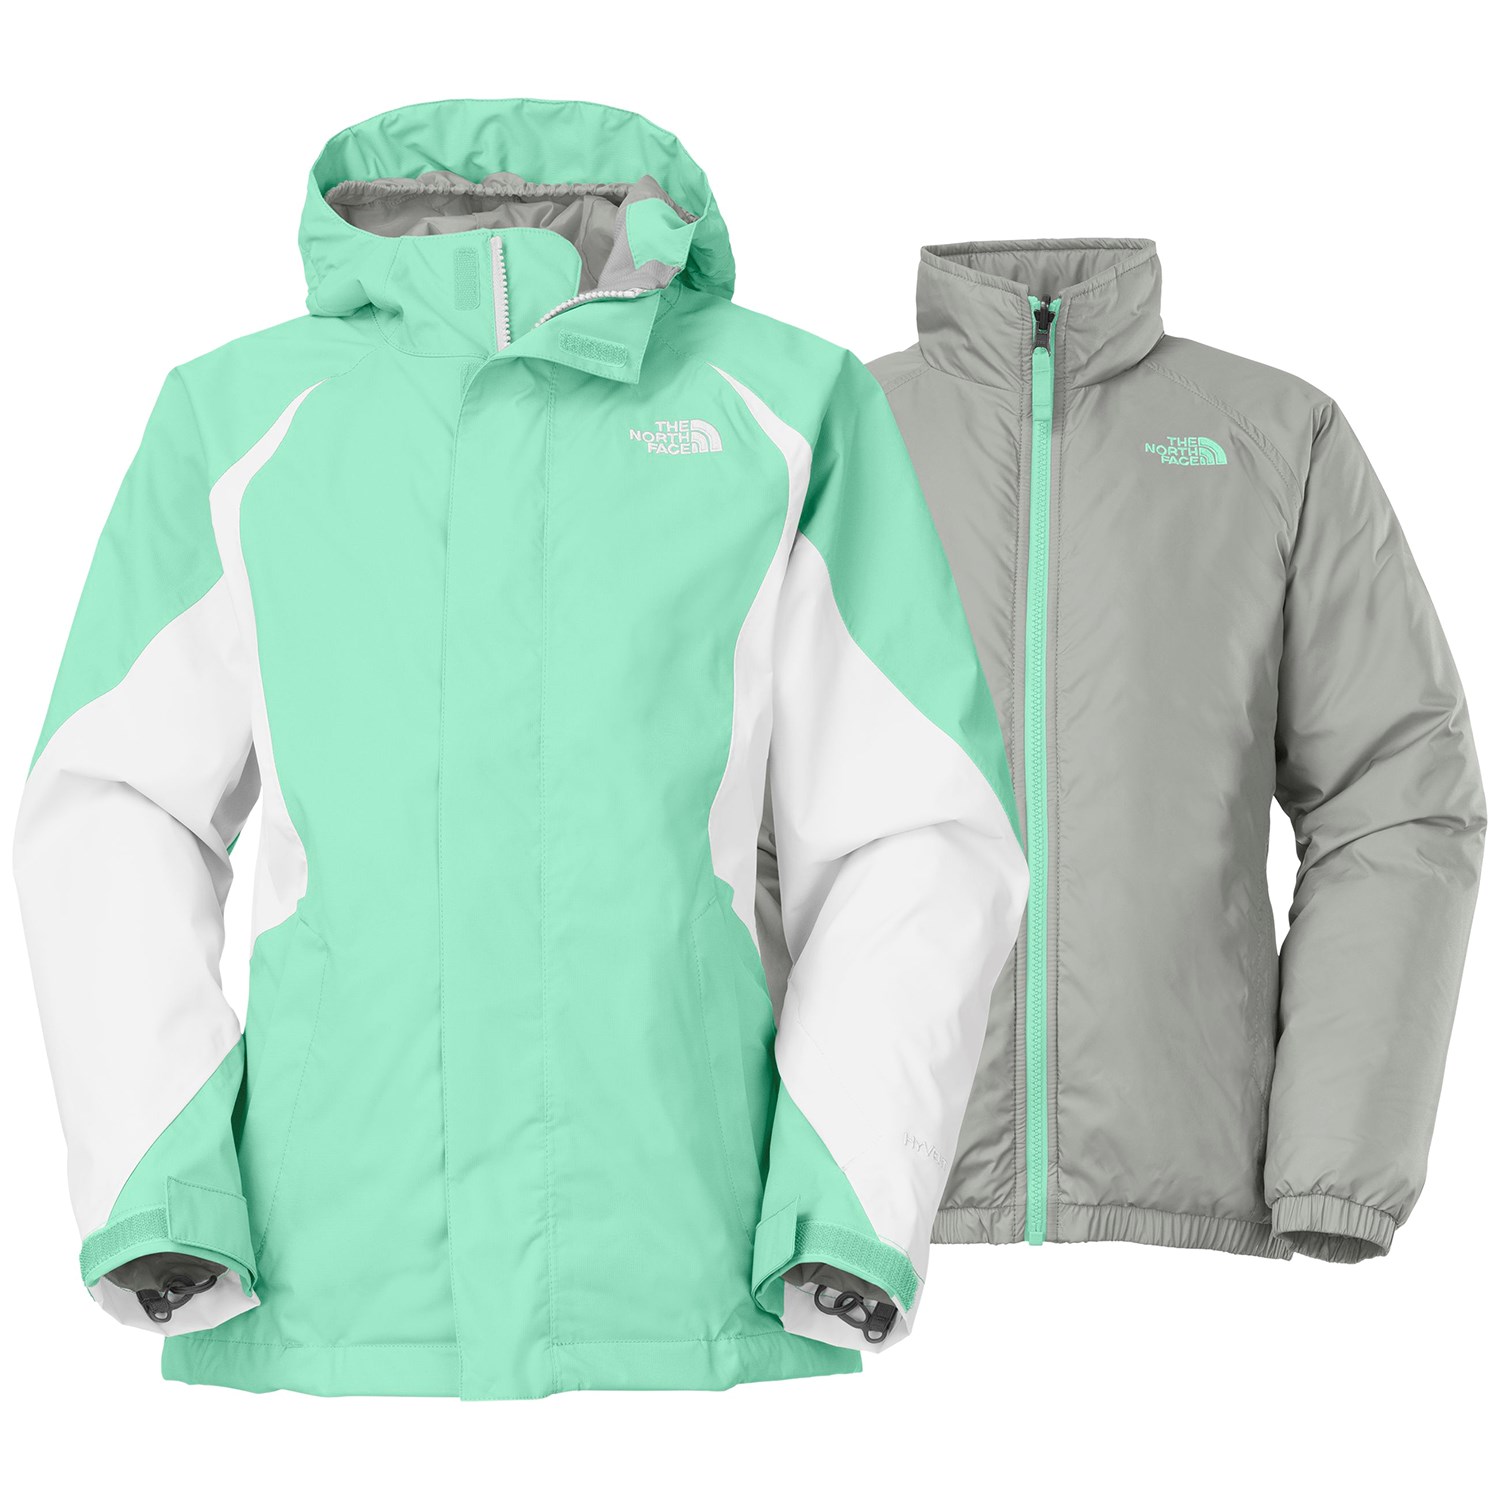 the north face kira triclimate jacket